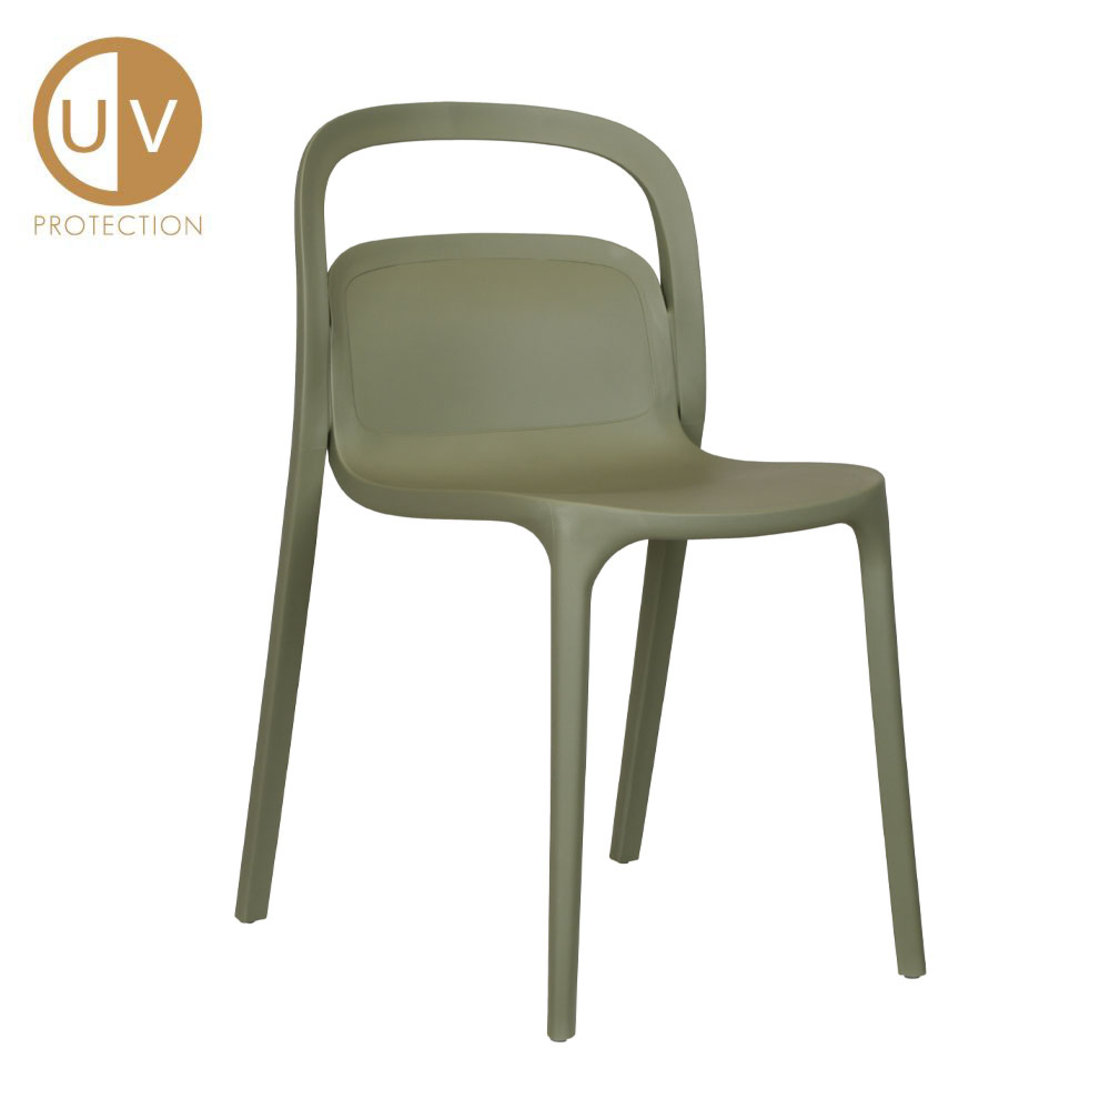 SMITH CHAIR PP OLIVE GREEN PRC